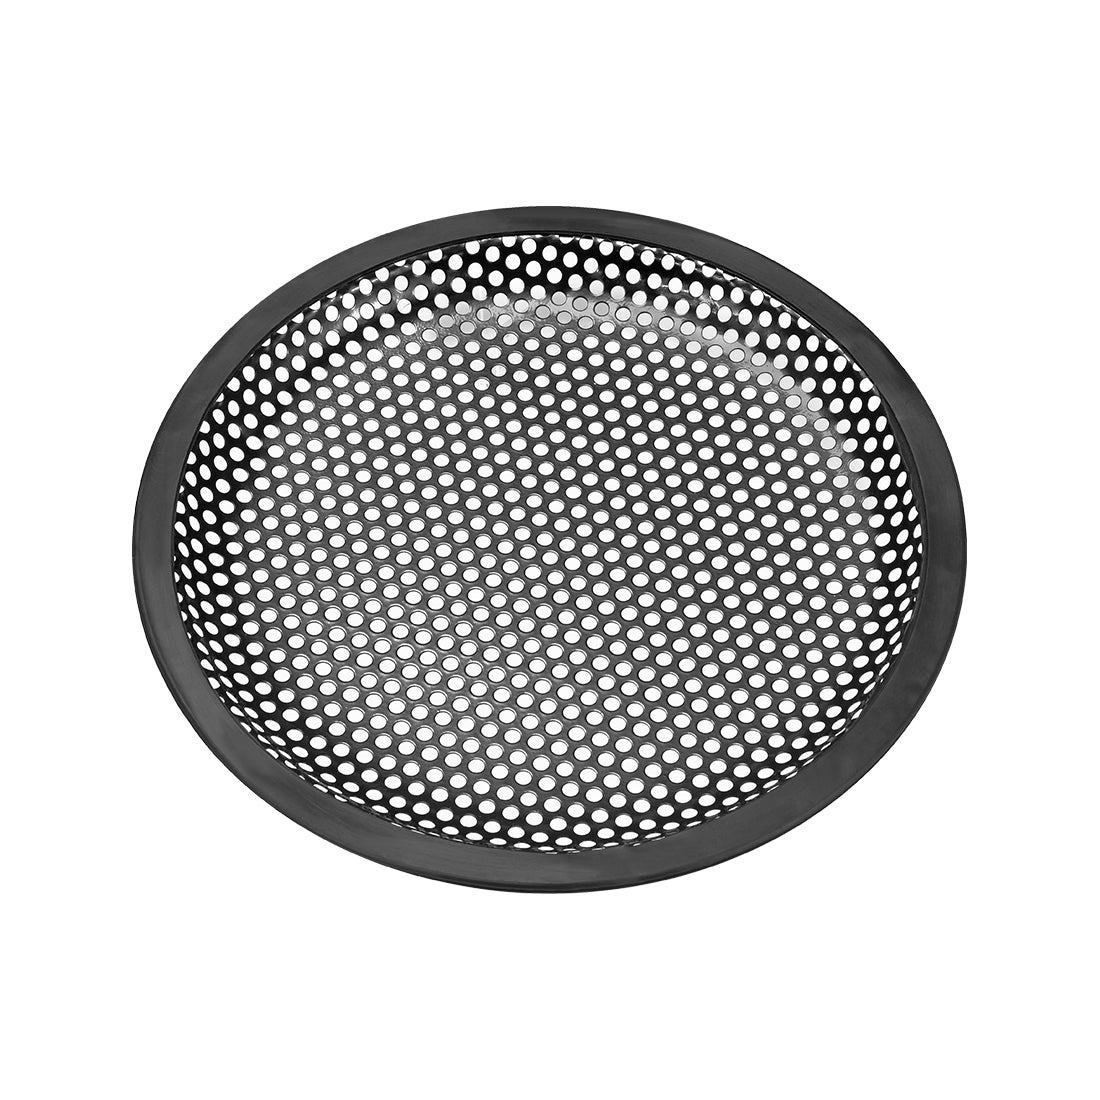 uxcell Uxcell 4pcs 8" Speaker Waffle Grill Metal Mesh Audio Subwoofer Guard Protector Cover with Clips,Screws